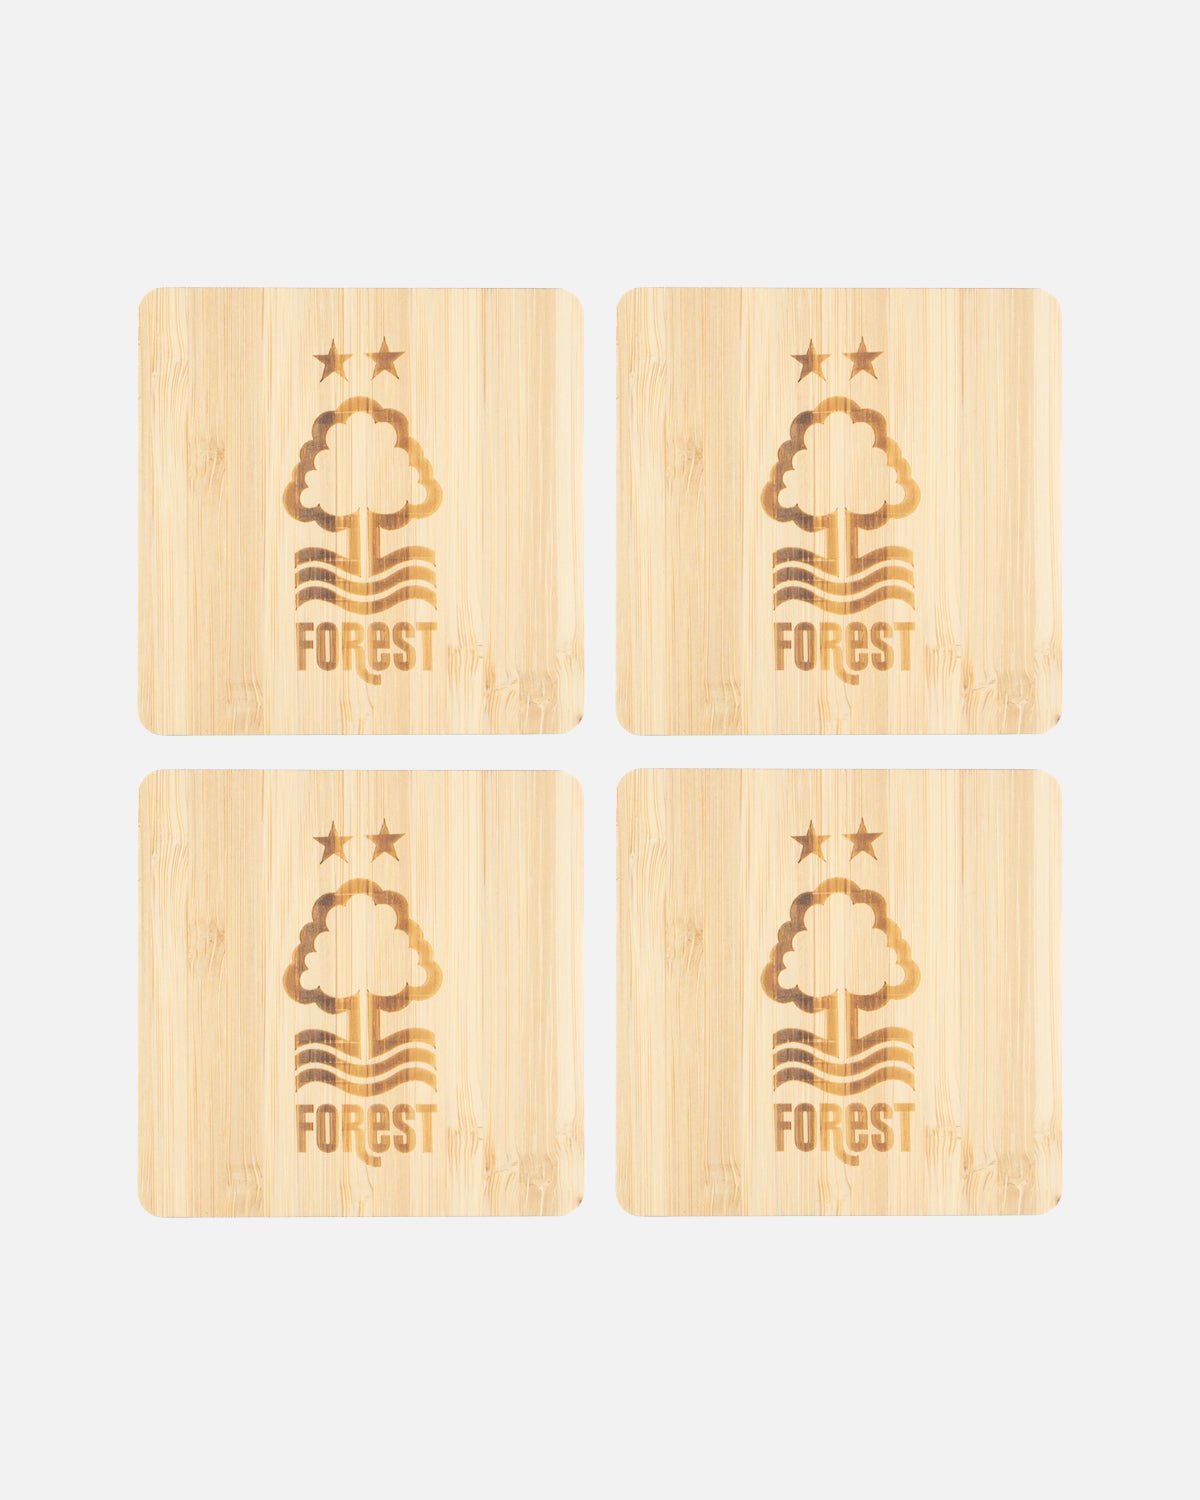 NFFC Bamboo Coasters - Pack of 4 - Nottingham Forest FC